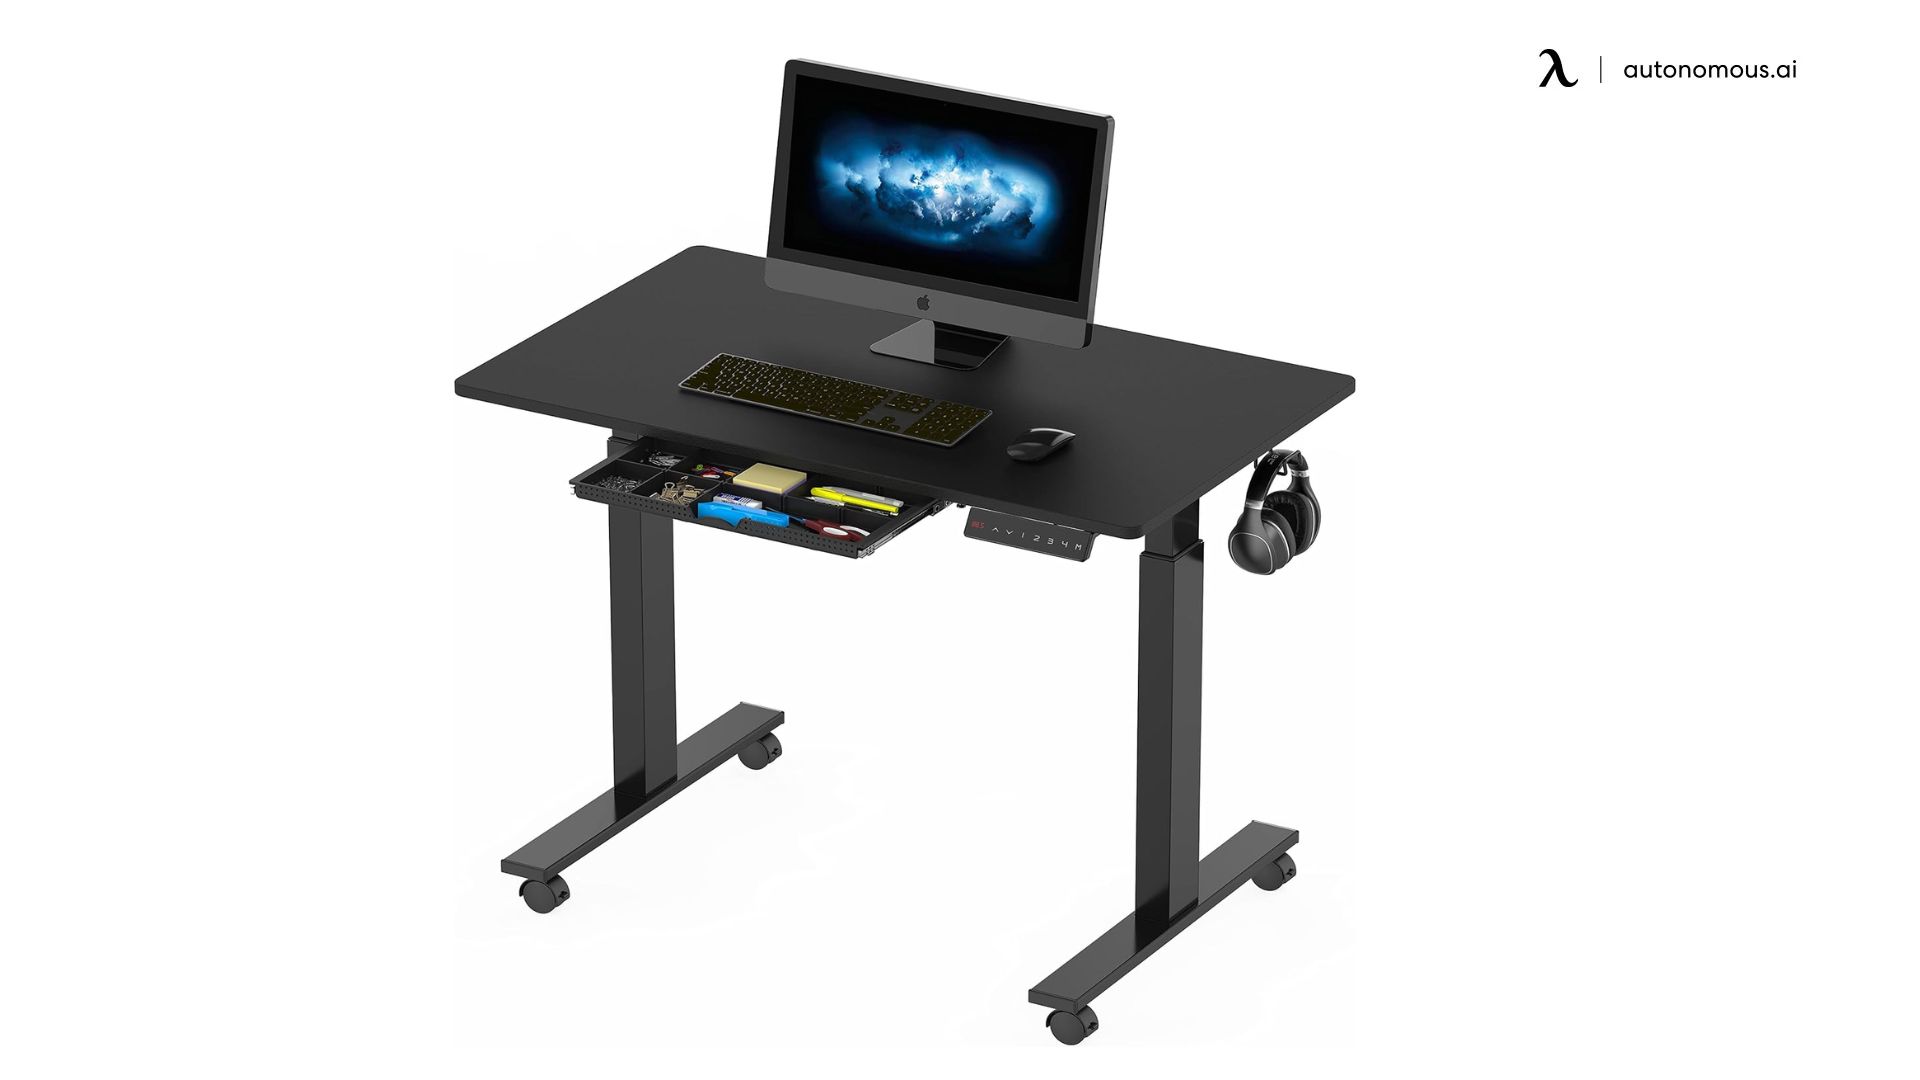 SHW Small Electric Height Adjustable Mobile Sit Stand Desk